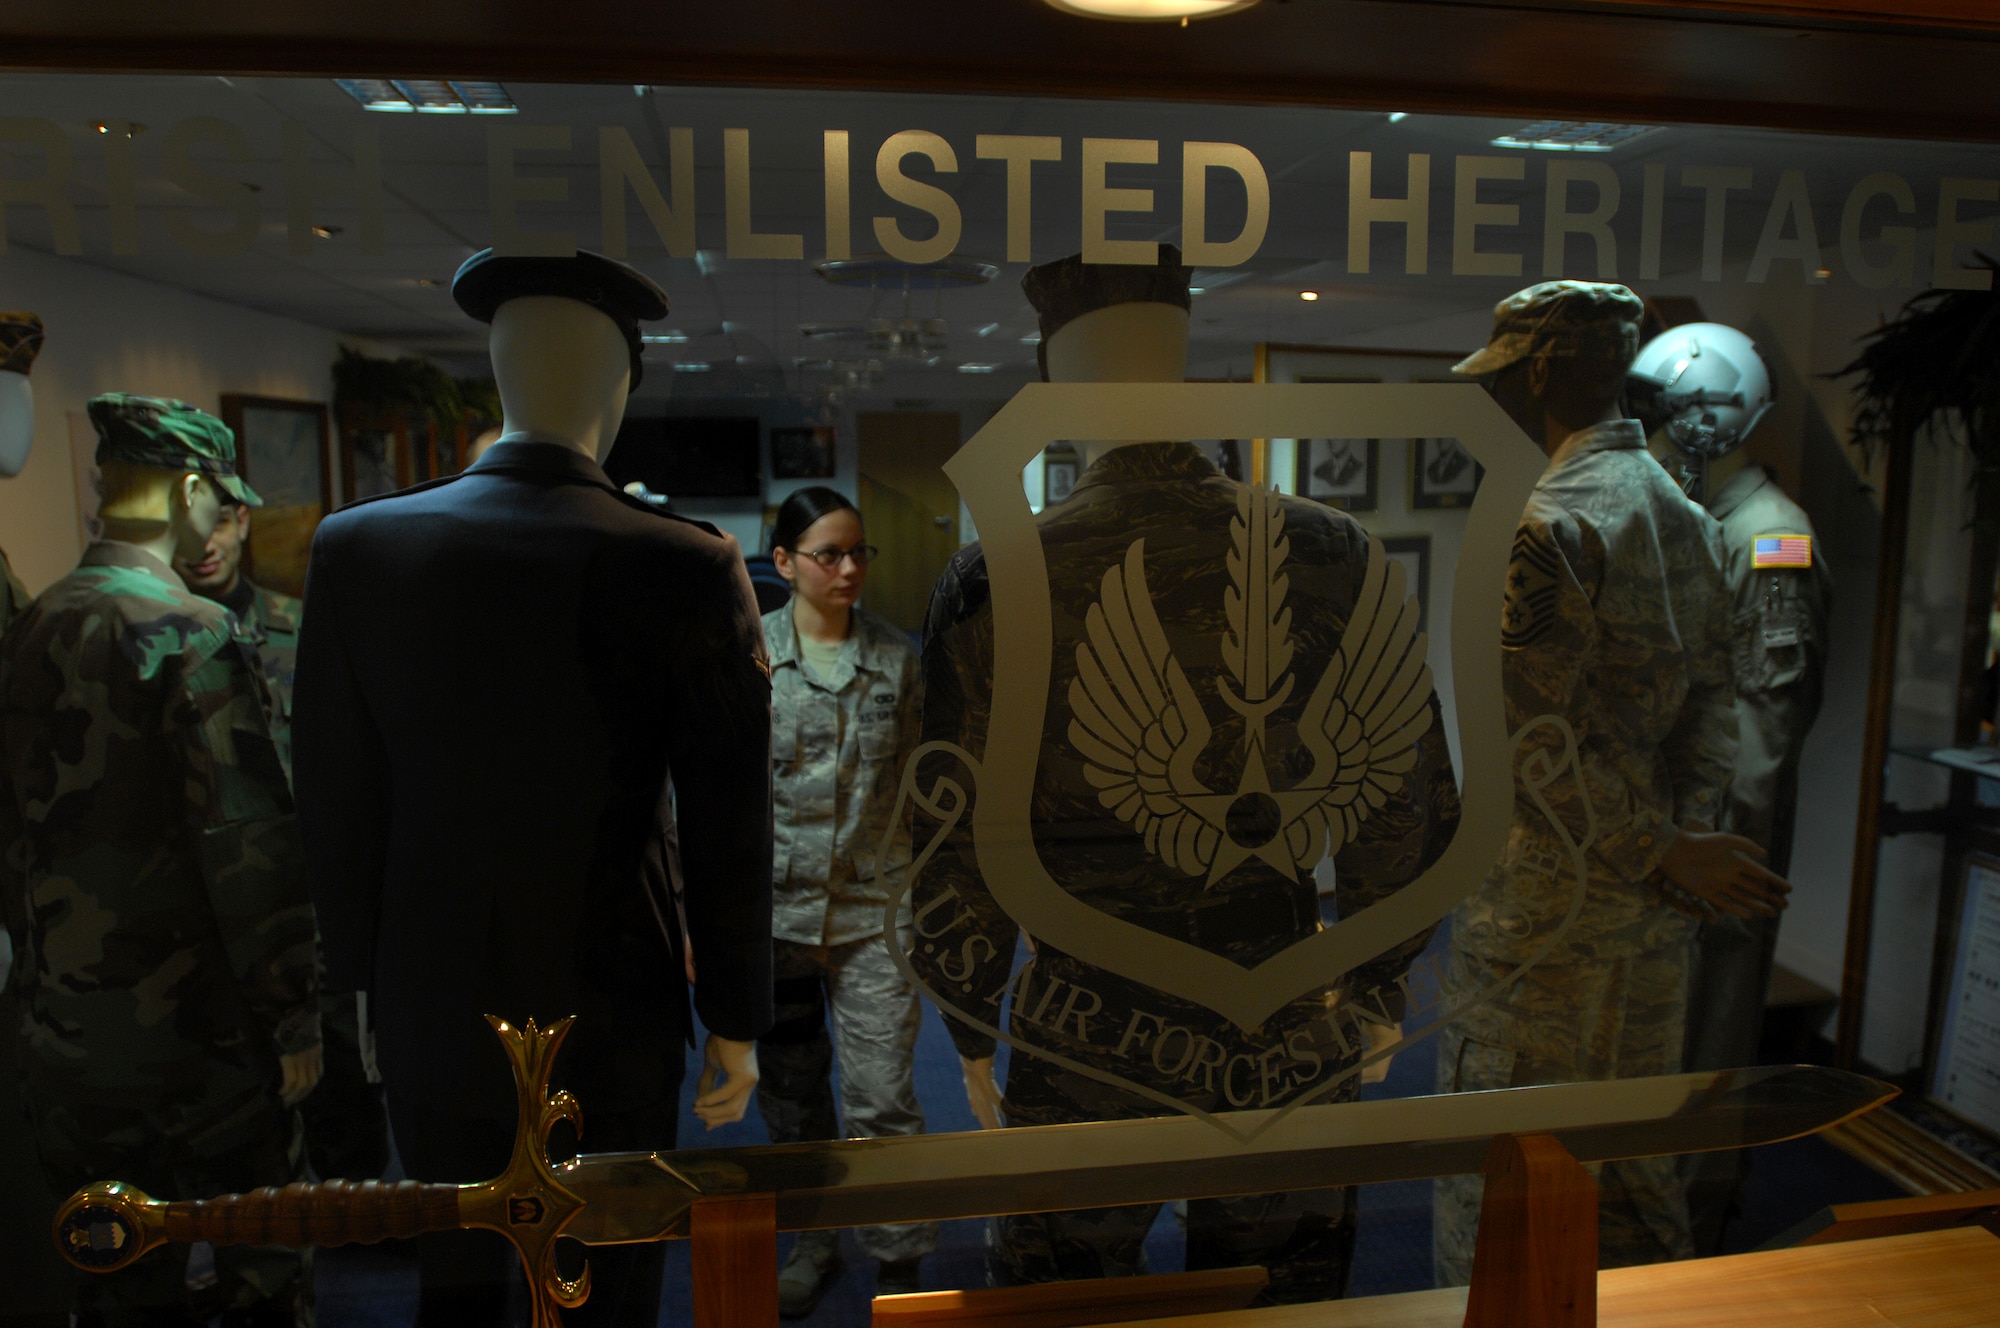 Air Force members take a tour of the Ramstein Air Base Enlisted Heritage Hall Jan. 6, 2009. The hall displays an array of different Air Force enlisted artifacts. (U.S. Air Force photo by Airman 1st Class Kenny Holston)